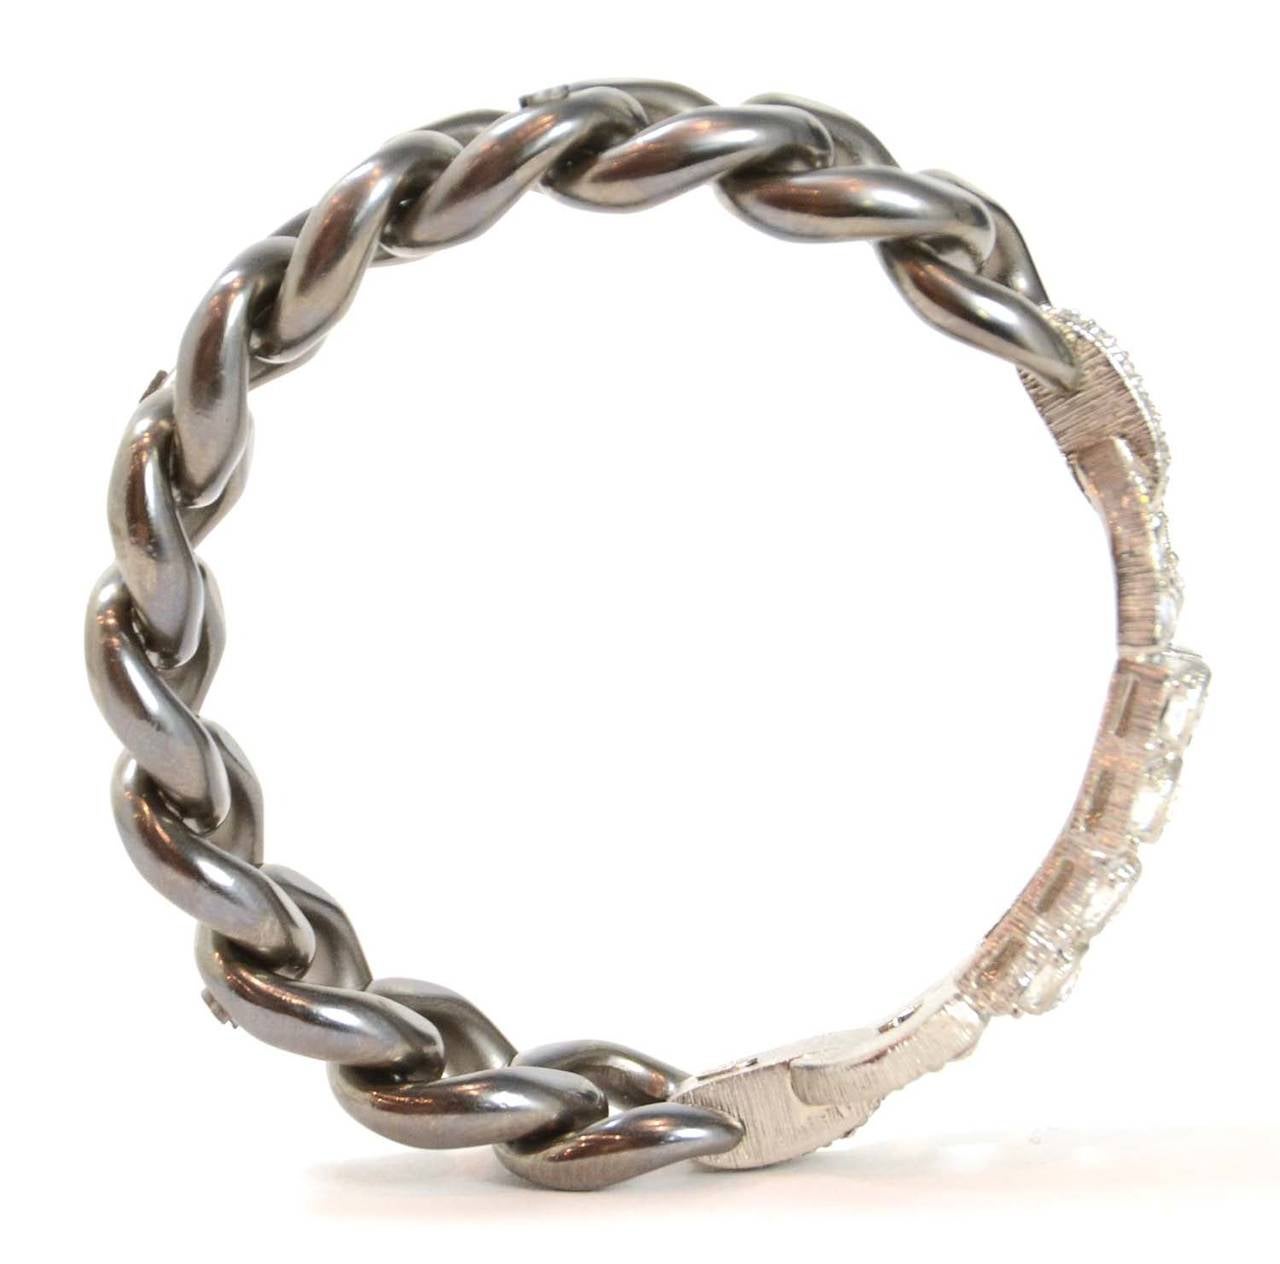 CHANEL '14 Brushed Gun Metal Chain-Link Bangle w/ Crystals 1